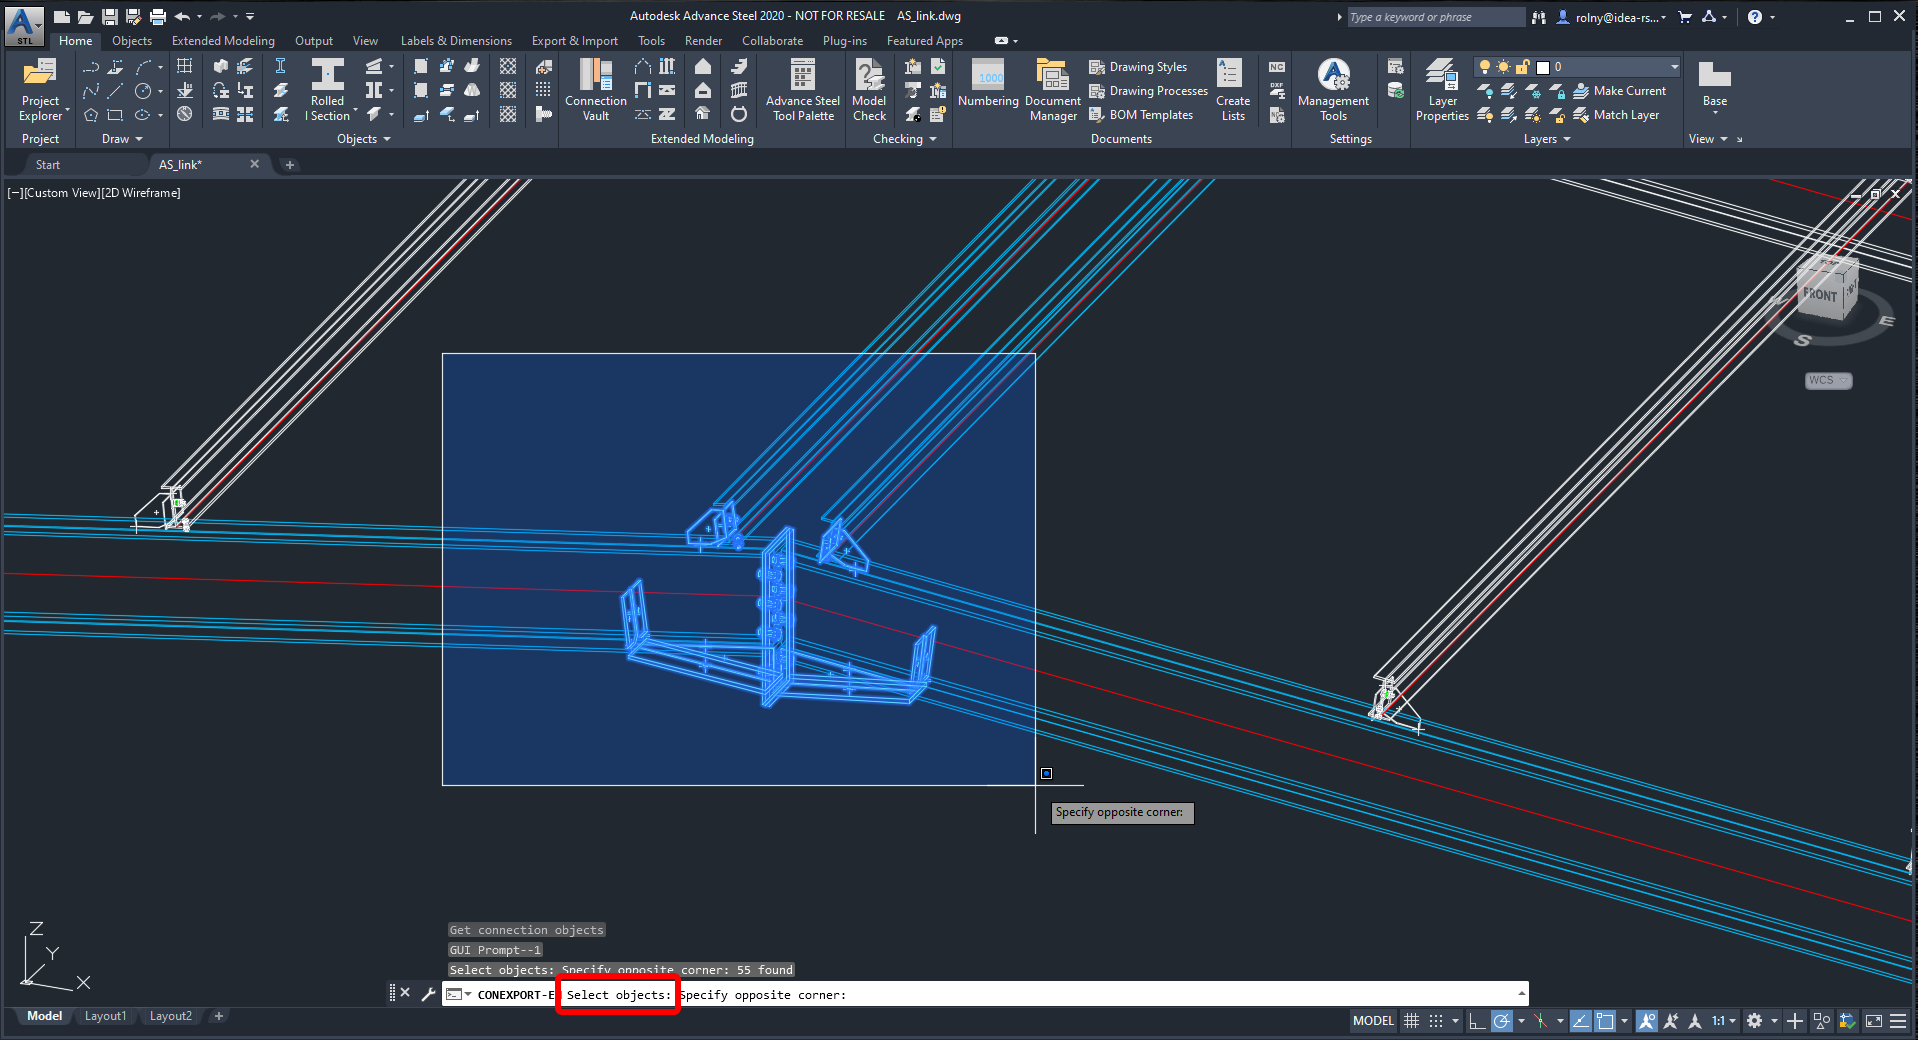 anaylzing connections in autodesk advance steel